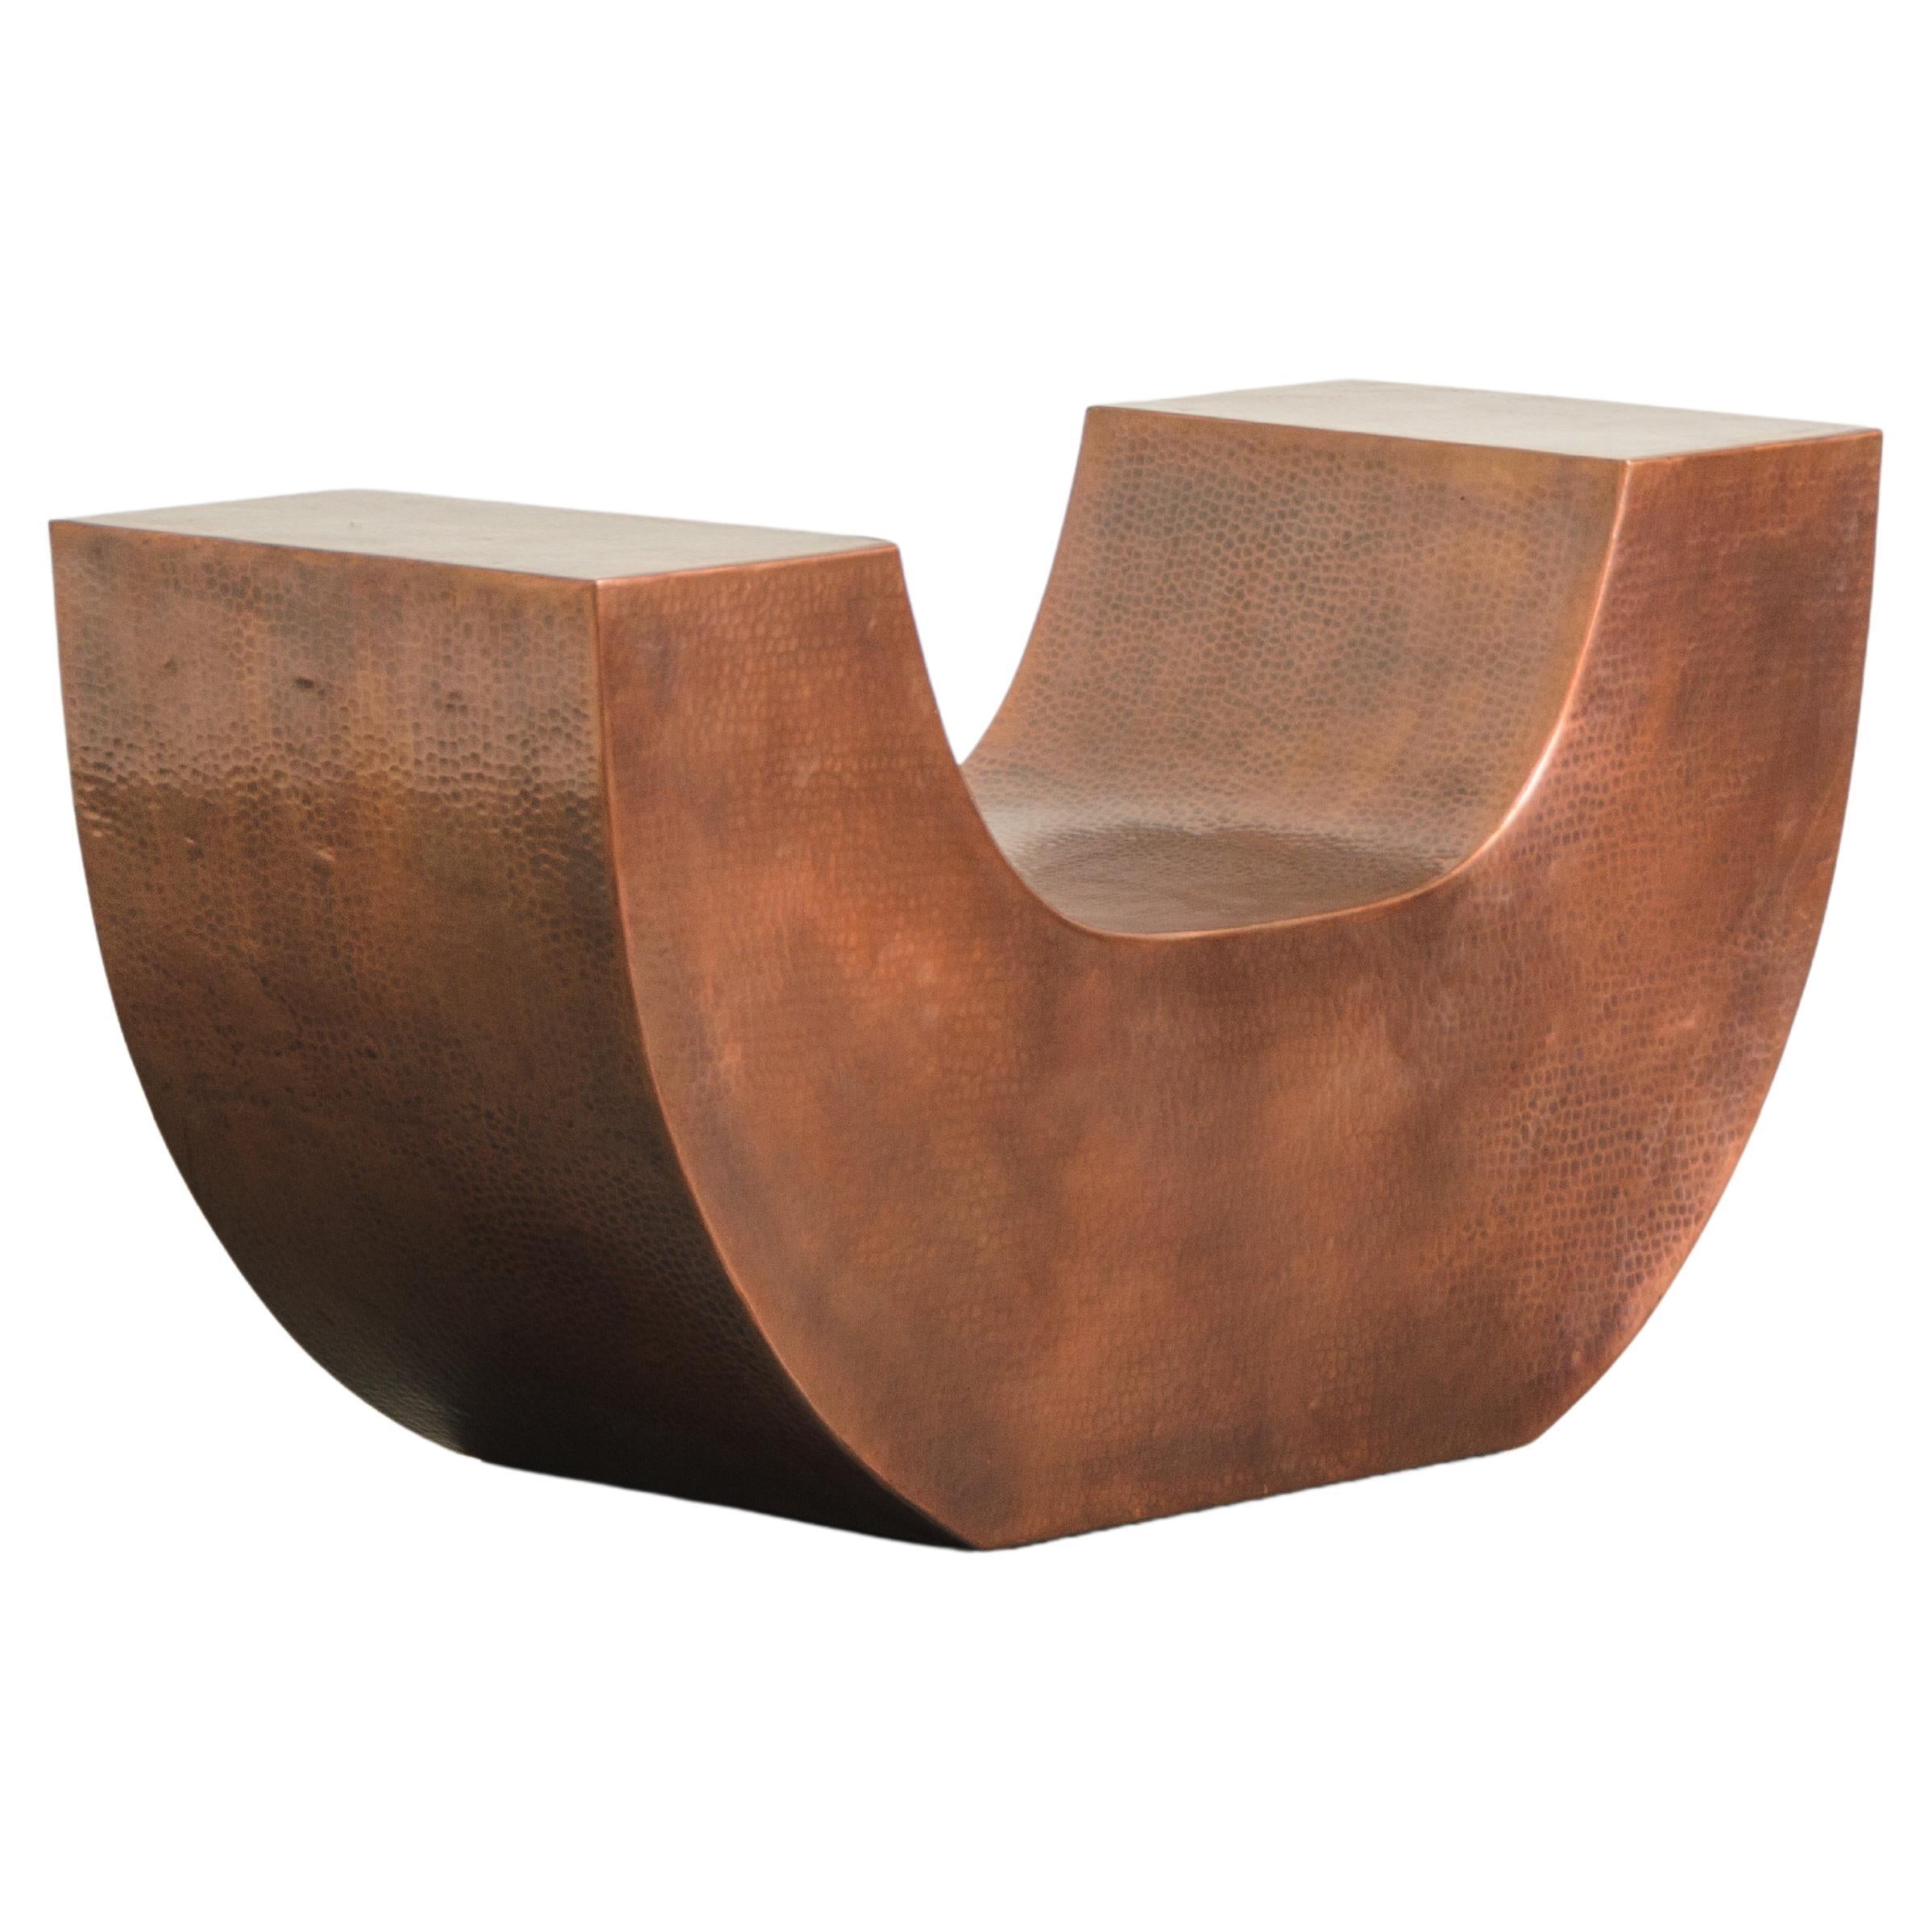 Contemporary Robert Kuo Repoussé Huang Chair in Antique Copper, Limited Edition For Sale